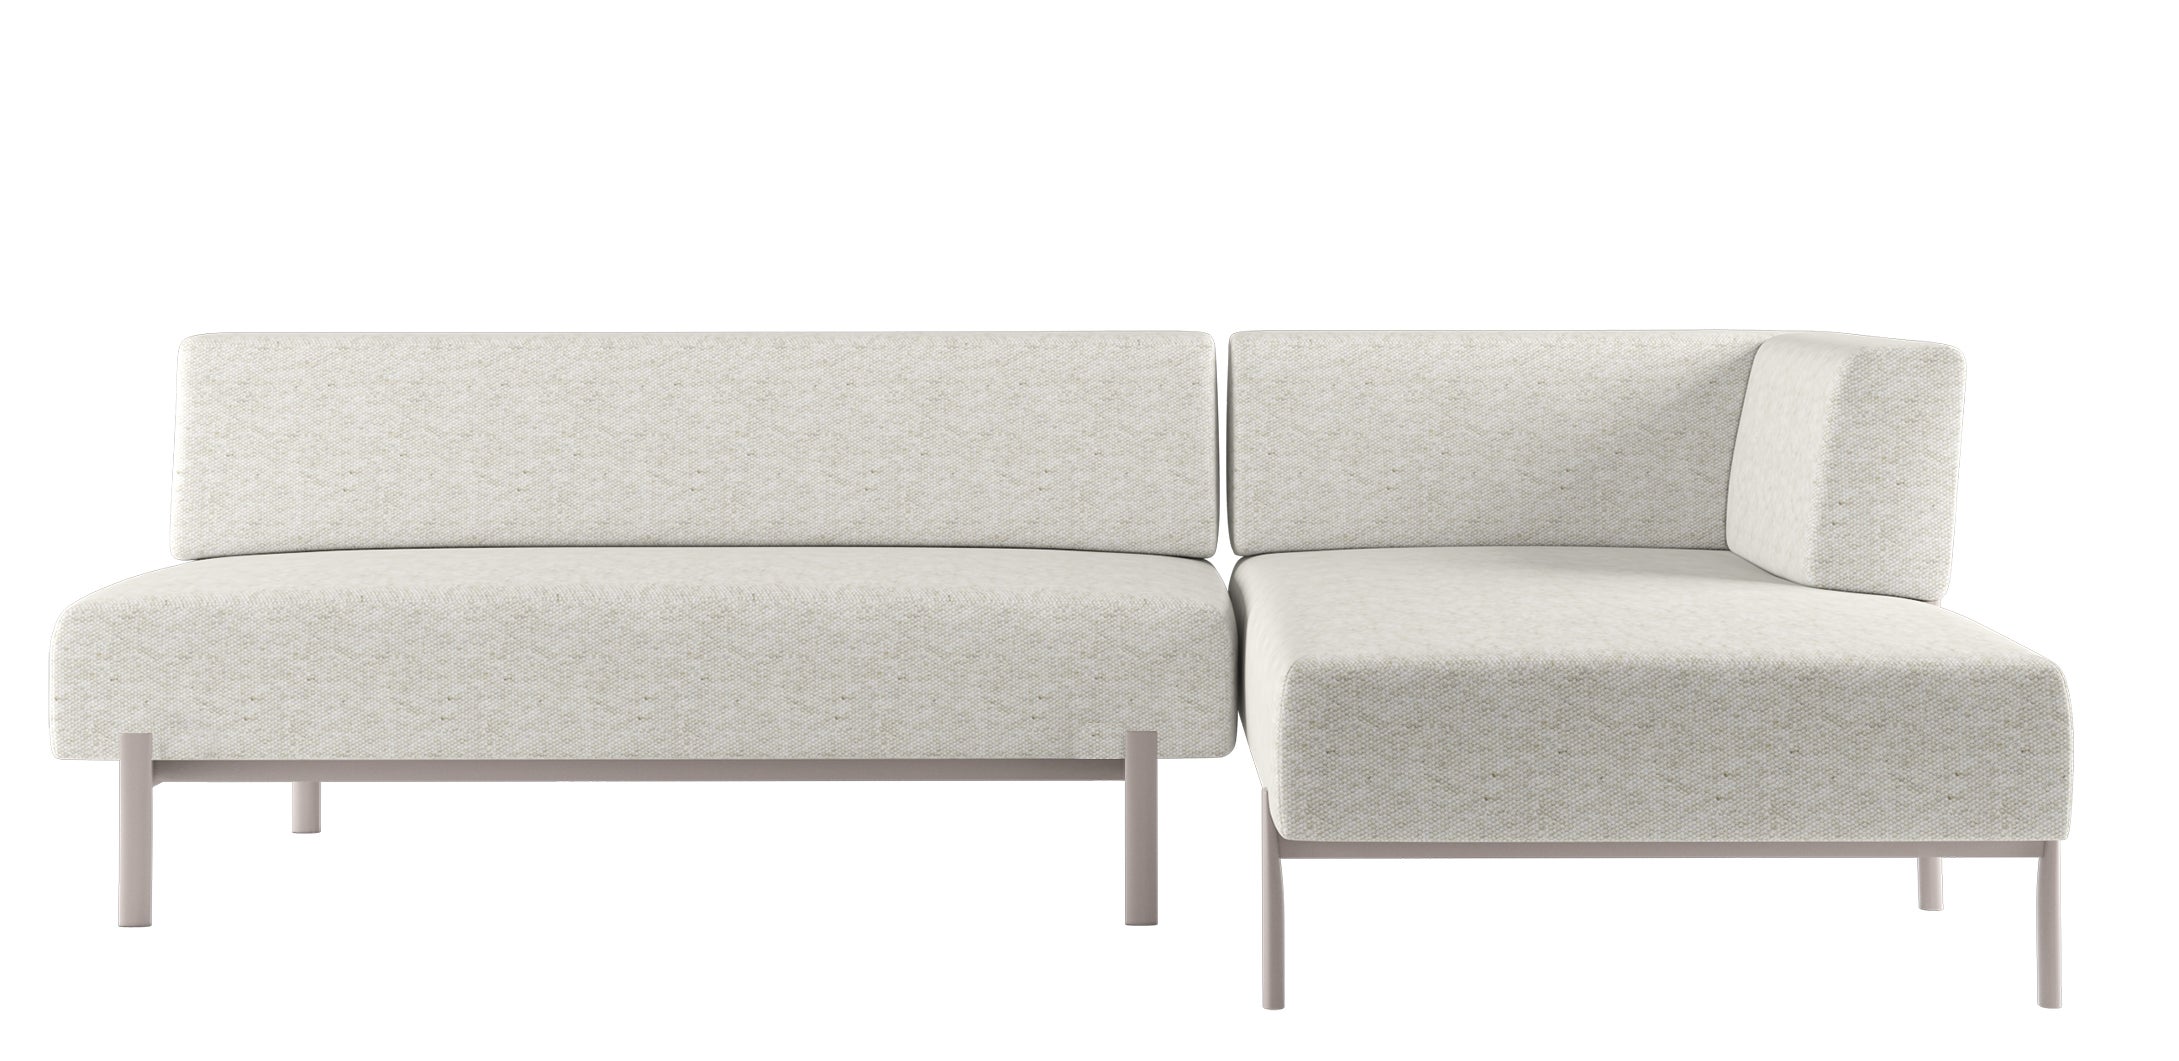 Alias T04+T06 Ten Outdoor Sofa Set in White with Sand Lacquered Aluminum Frame For Sale